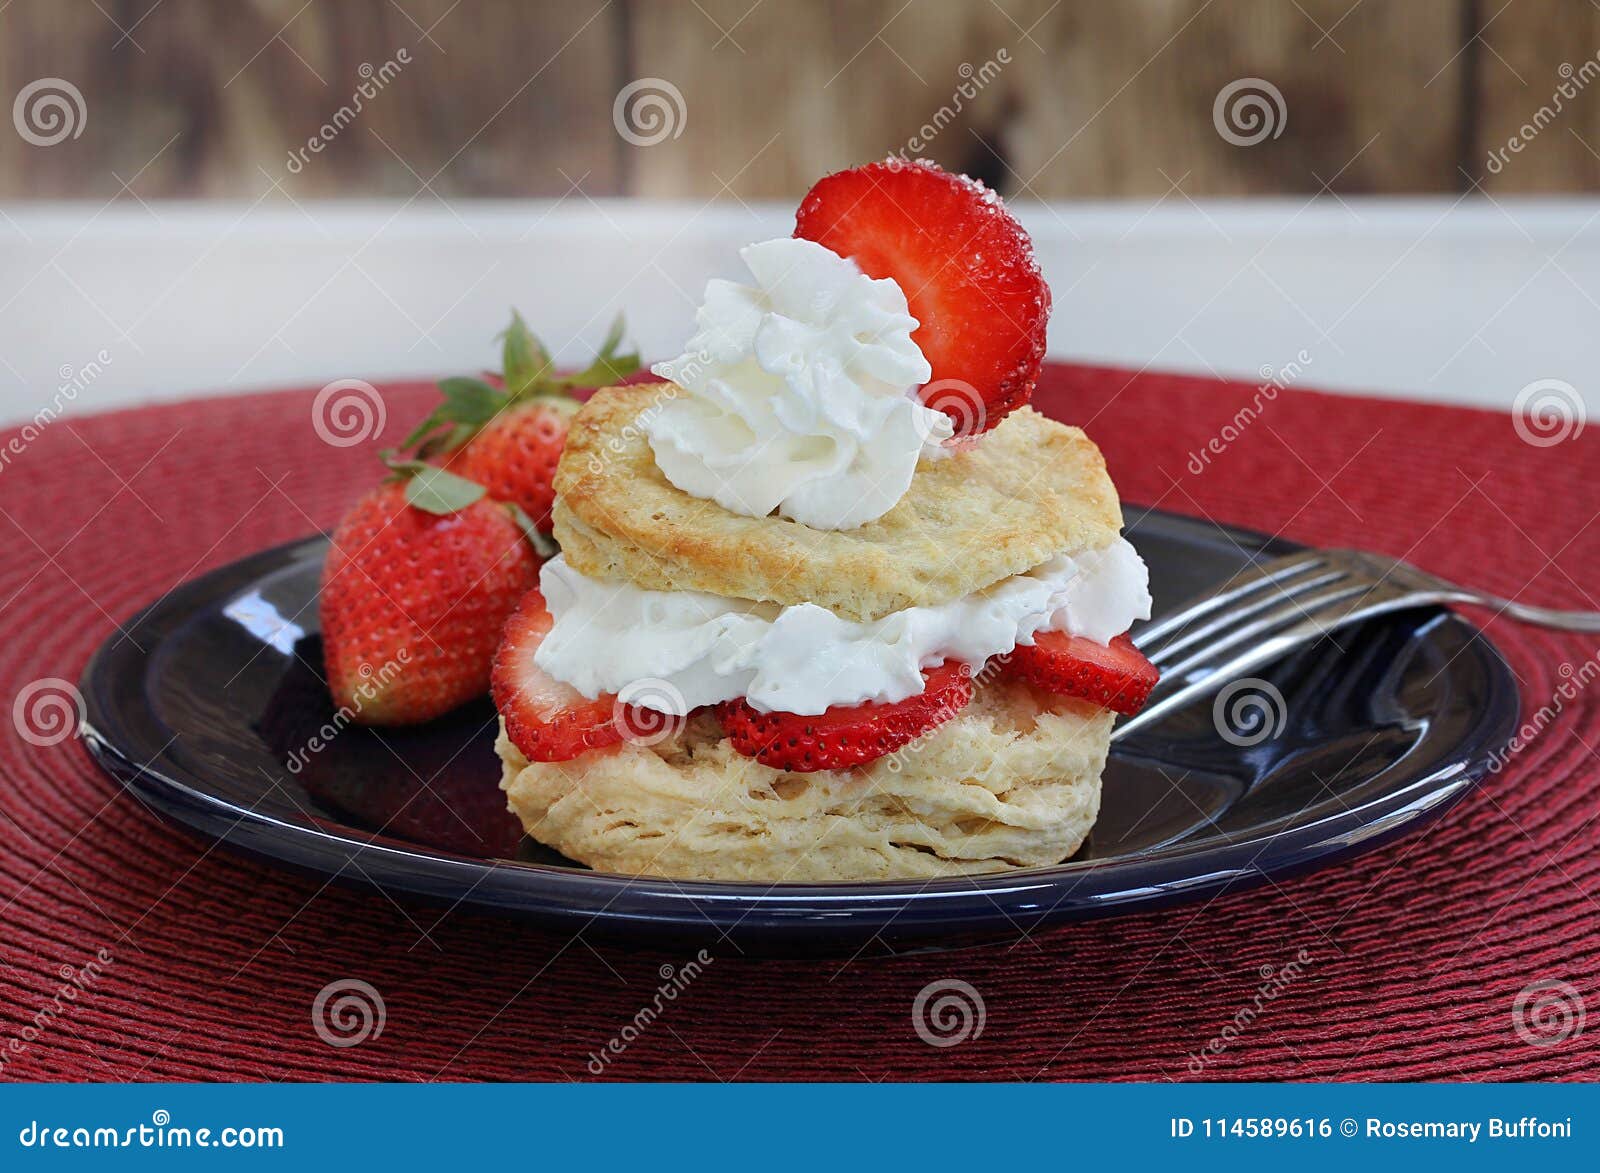 fresh strawberry shortcake with homemade biscuits and garnished